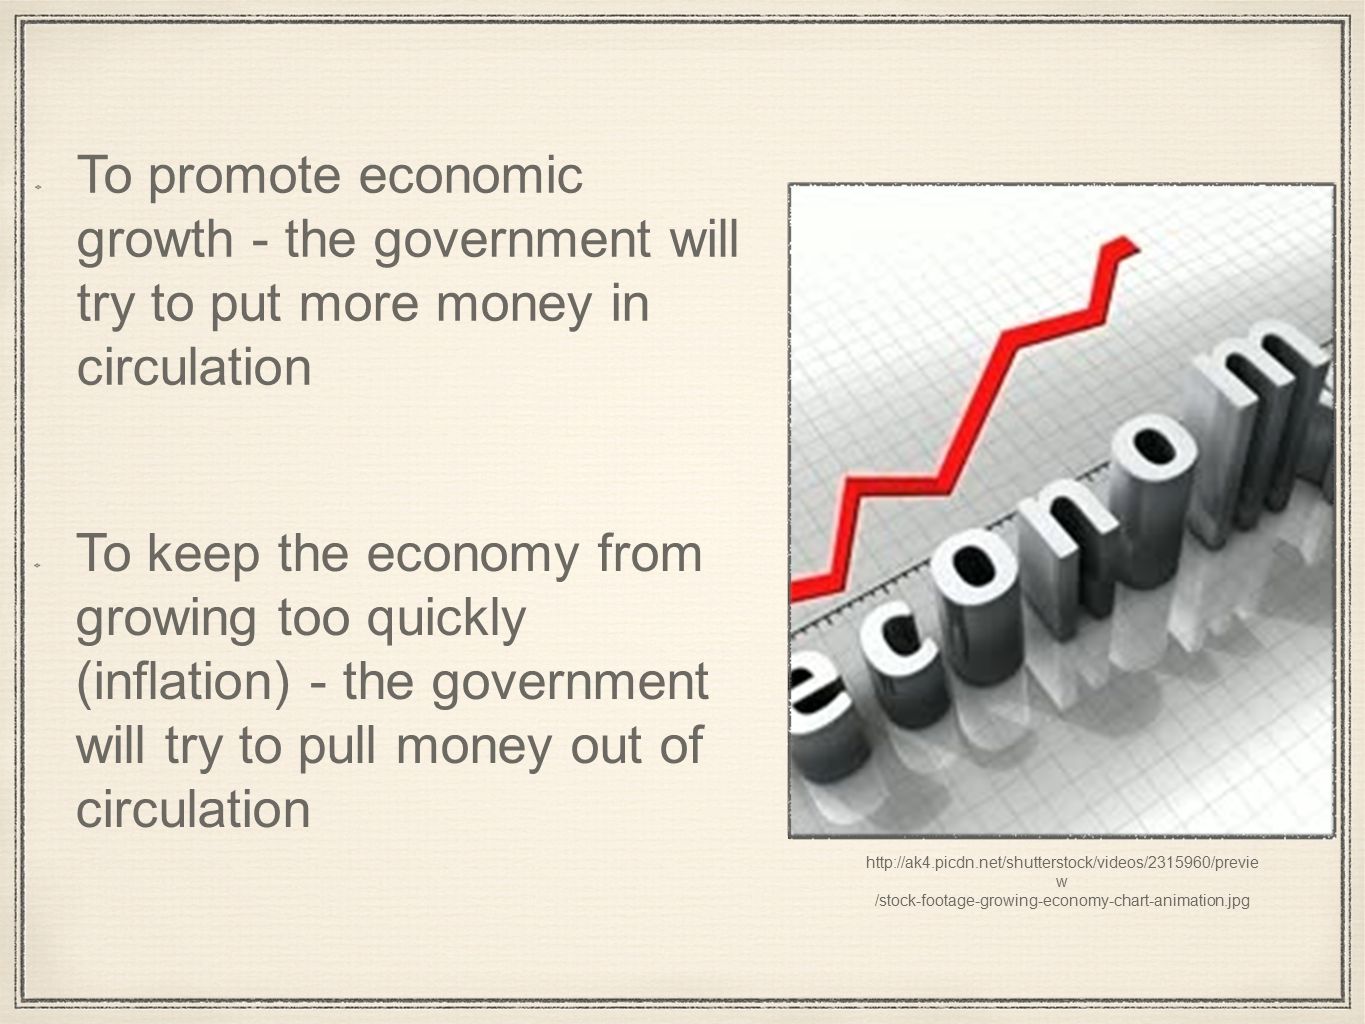 w /stock-footage-growing-economy-chart-animation.jpg To promote economic growth - the government will try to put more money in circulation To keep the economy from growing too quickly (inflation) - the government will try to pull money out of circulation